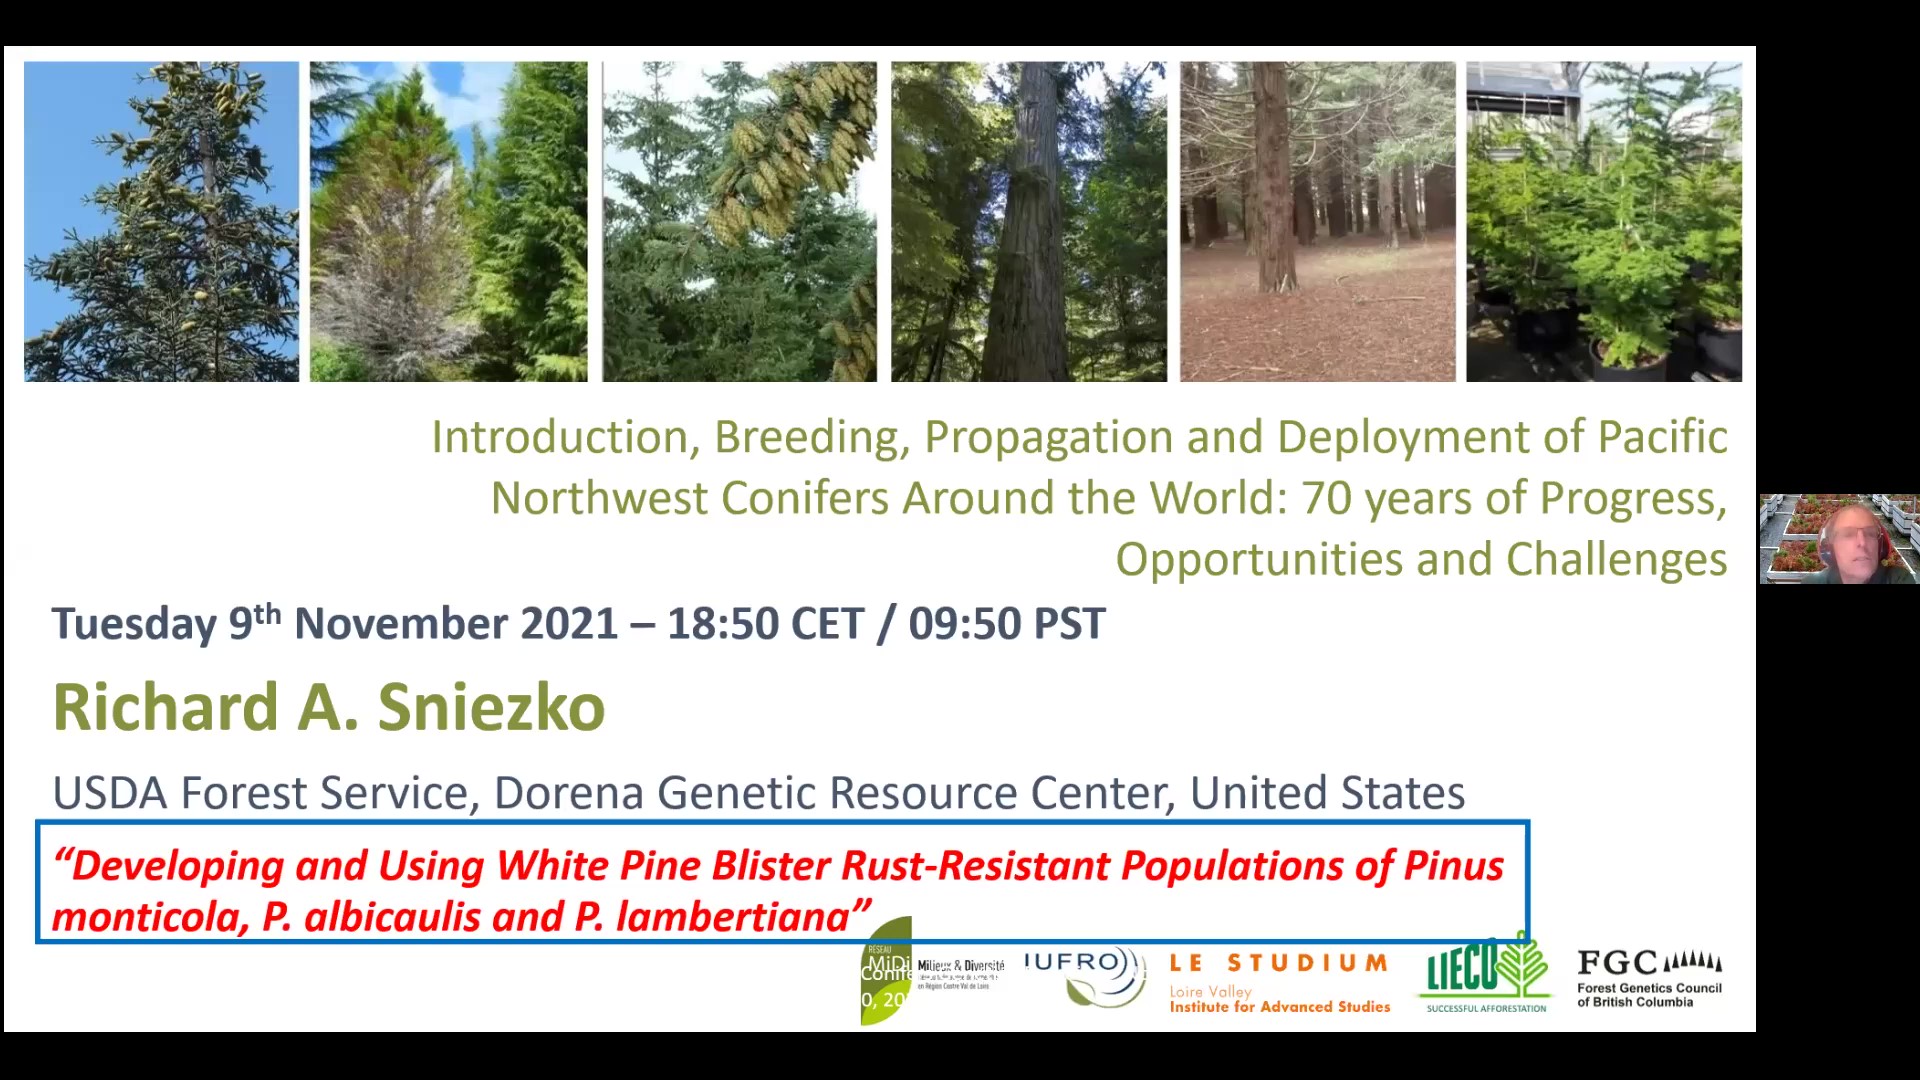 Developing and Using White Pine Blister RustResistant Populations of Pinus monticola, P. albicaulis and P. lamberti - Richard Sniezko